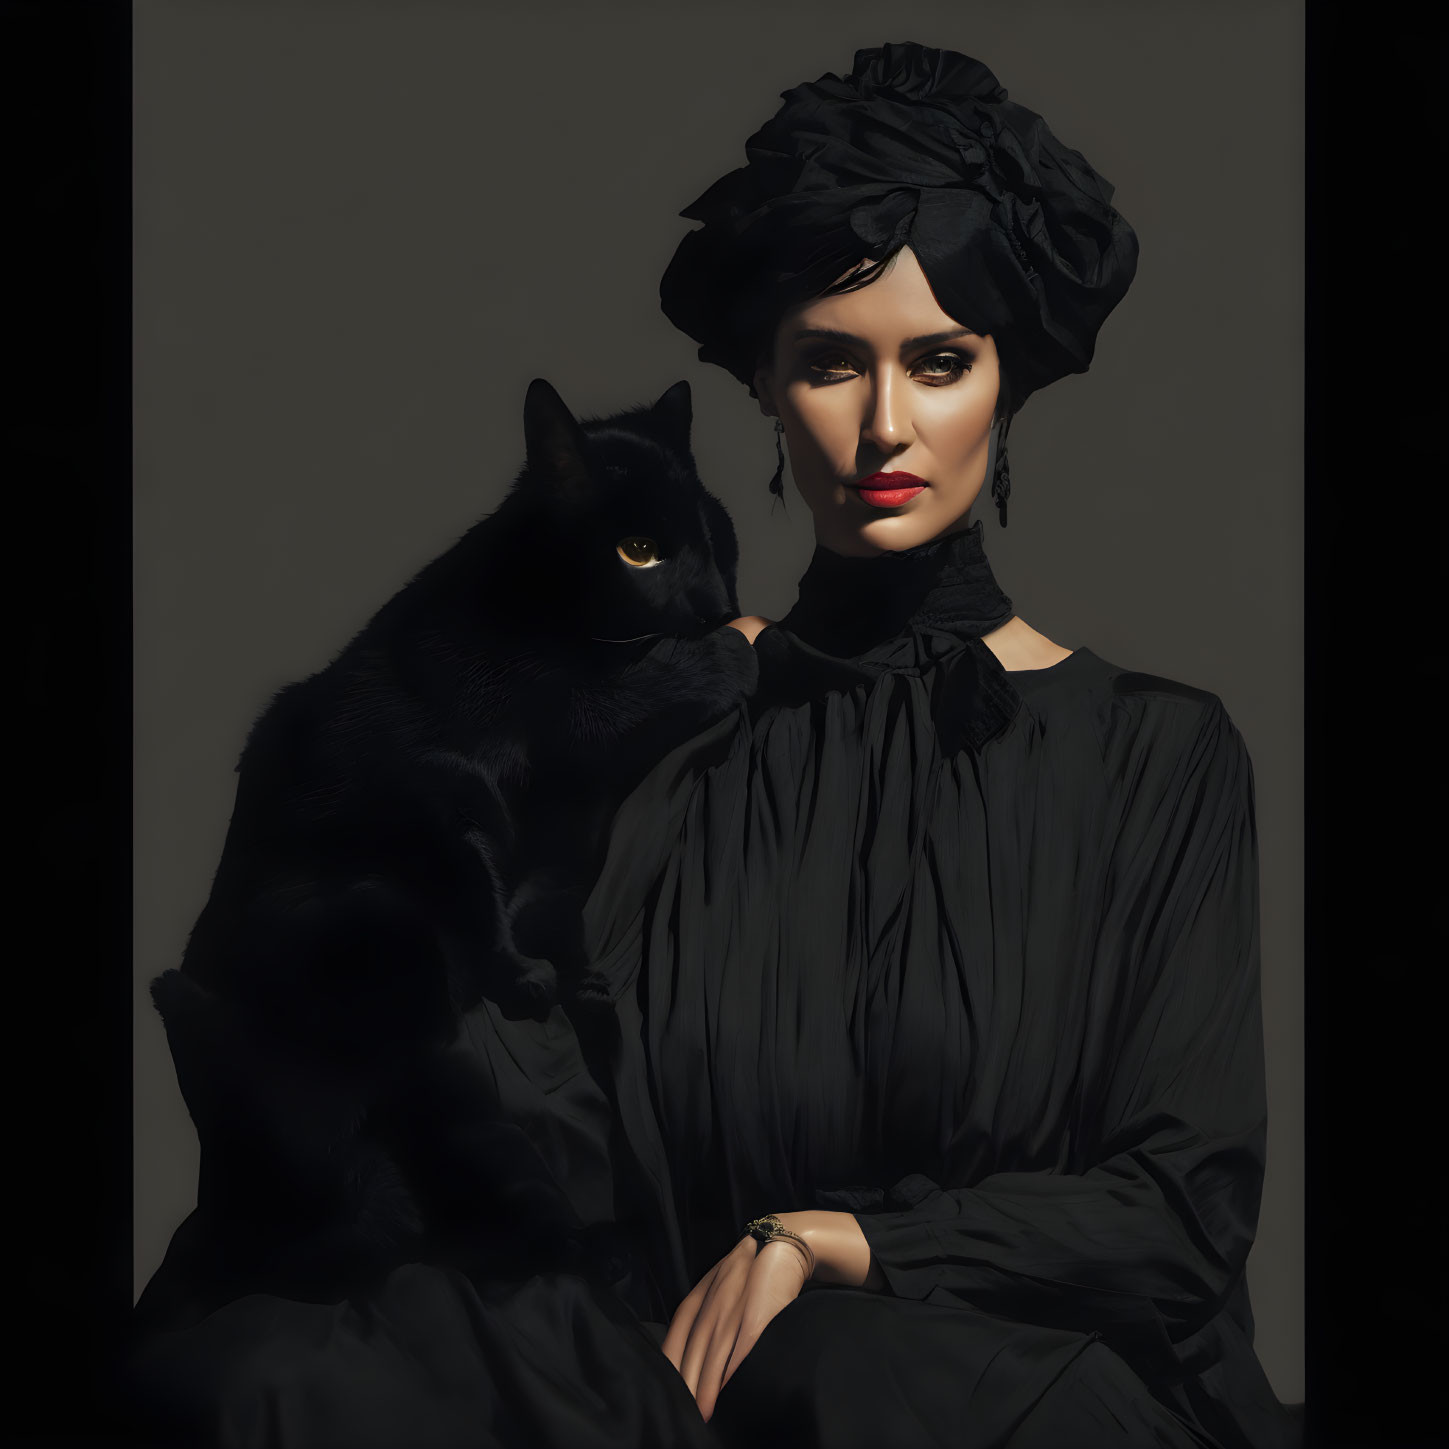 Woman in black turban and dress holding black cat on dark background